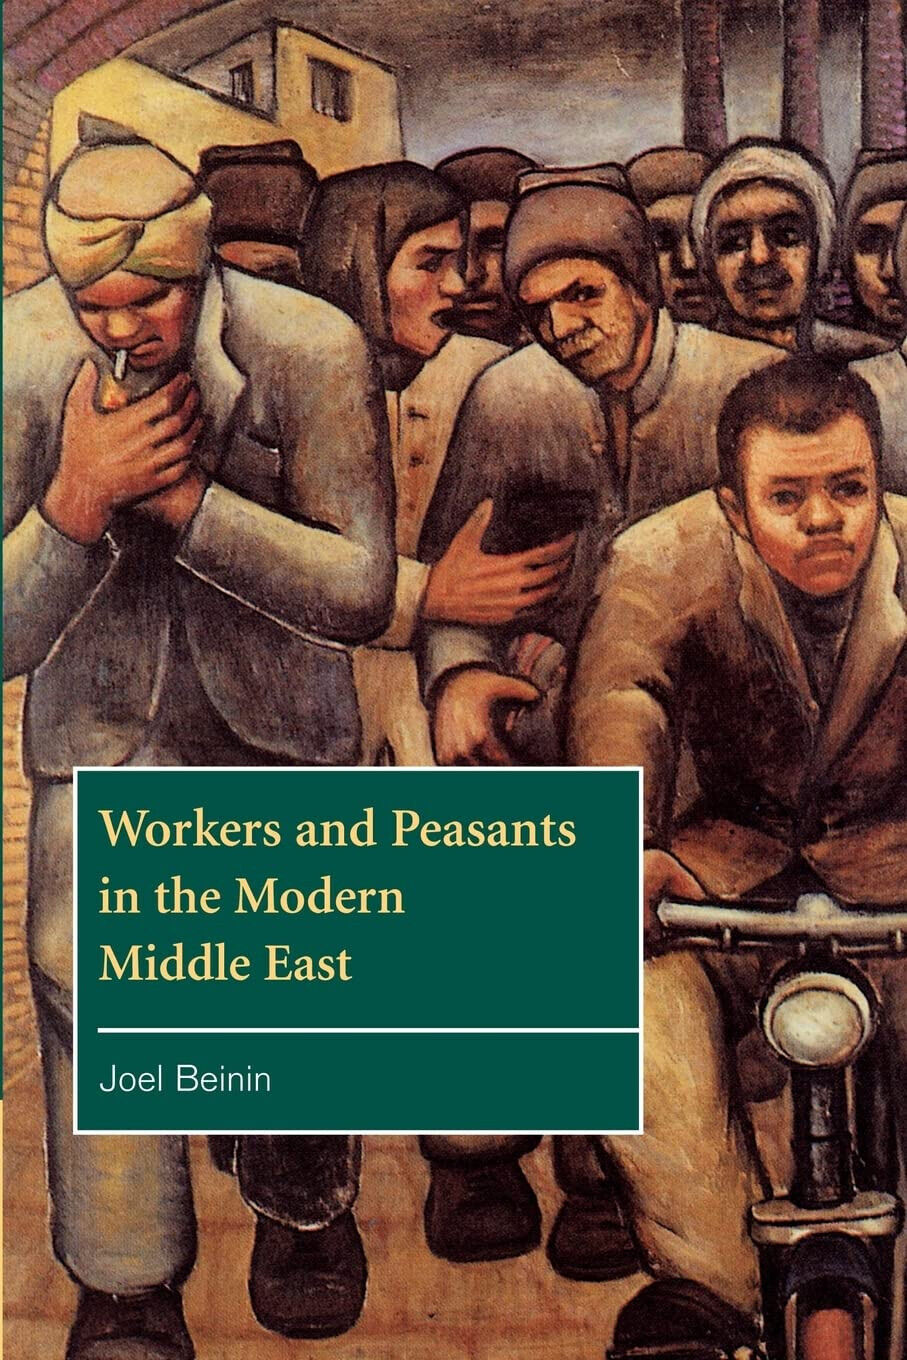 Workers and Peasants in the Modern Middle East - Joel Beinin - Cambridge, 2022